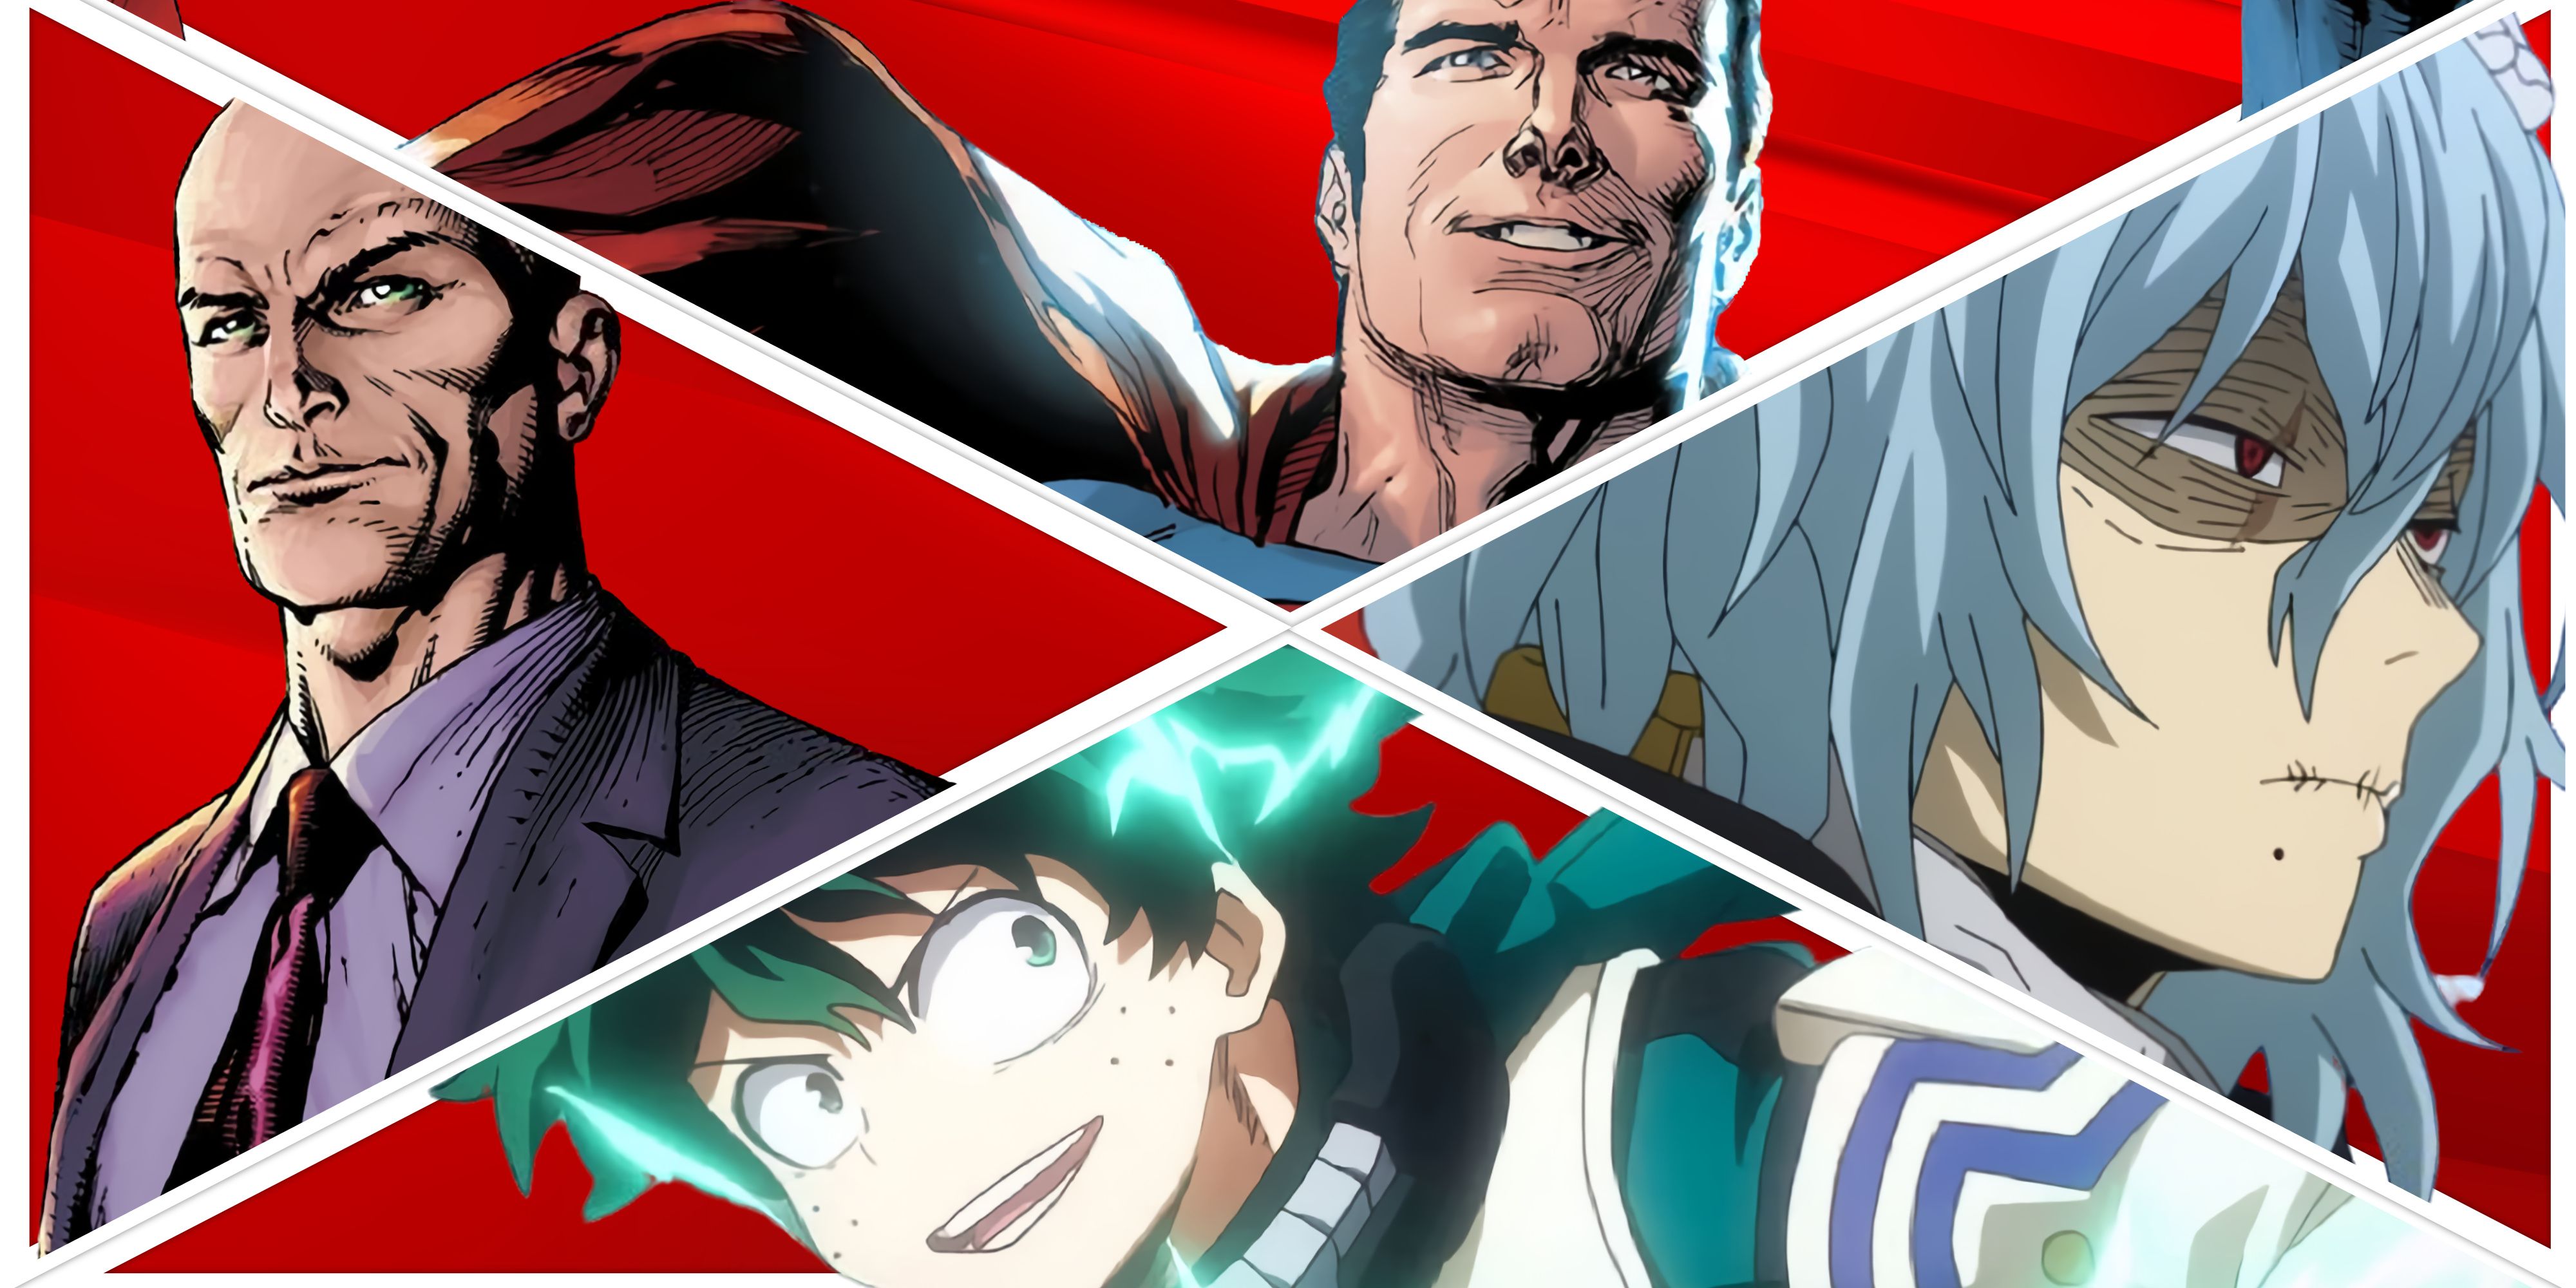 A collage of Superheroes and Villains from My Hero Academia and Superman comcis